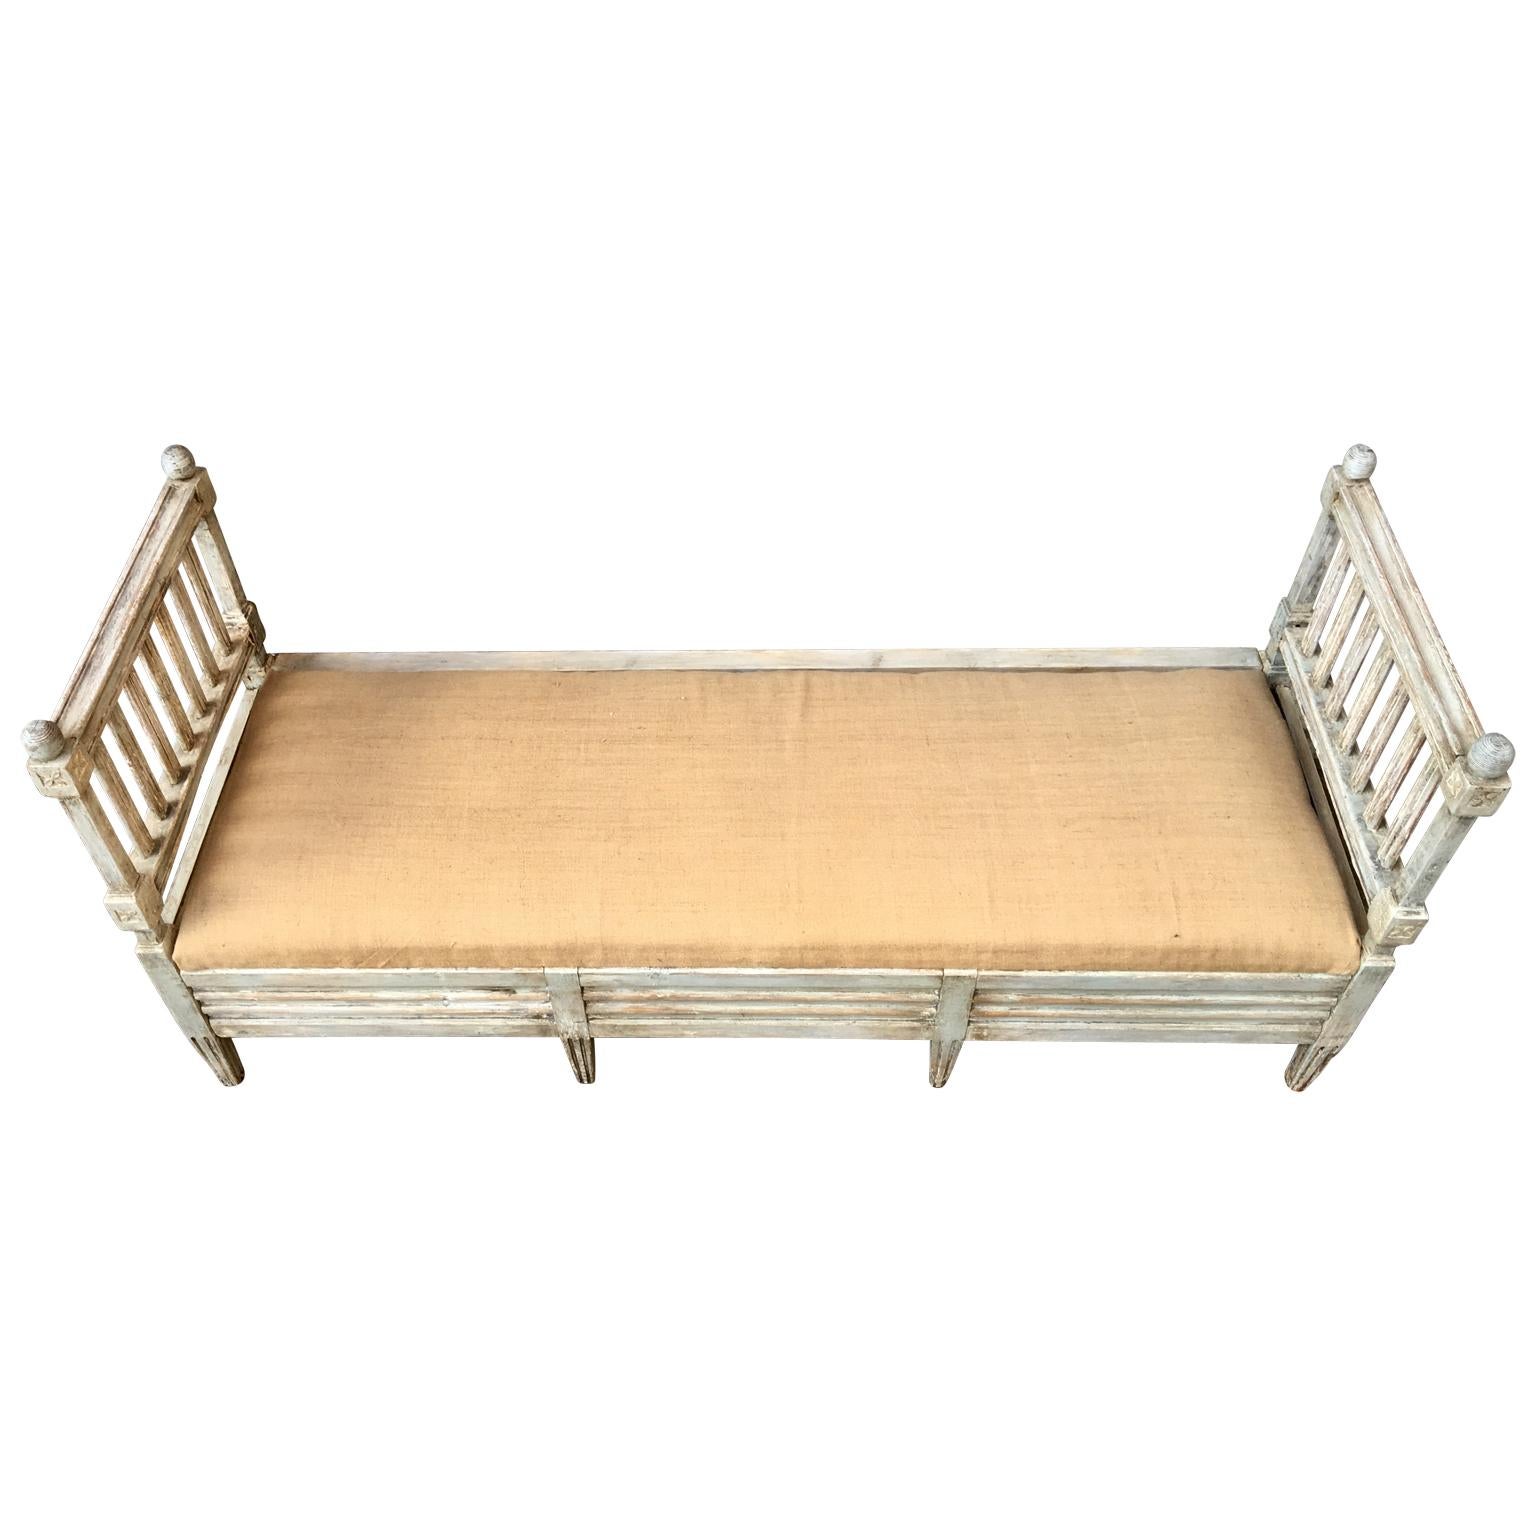 A Swedish Gustavian period grey painted bench, sofa. The sit can be removed and the place under it can be used for storage of linnen, blankets or similar. The Scandinavian rural culture is the mother of compact living.